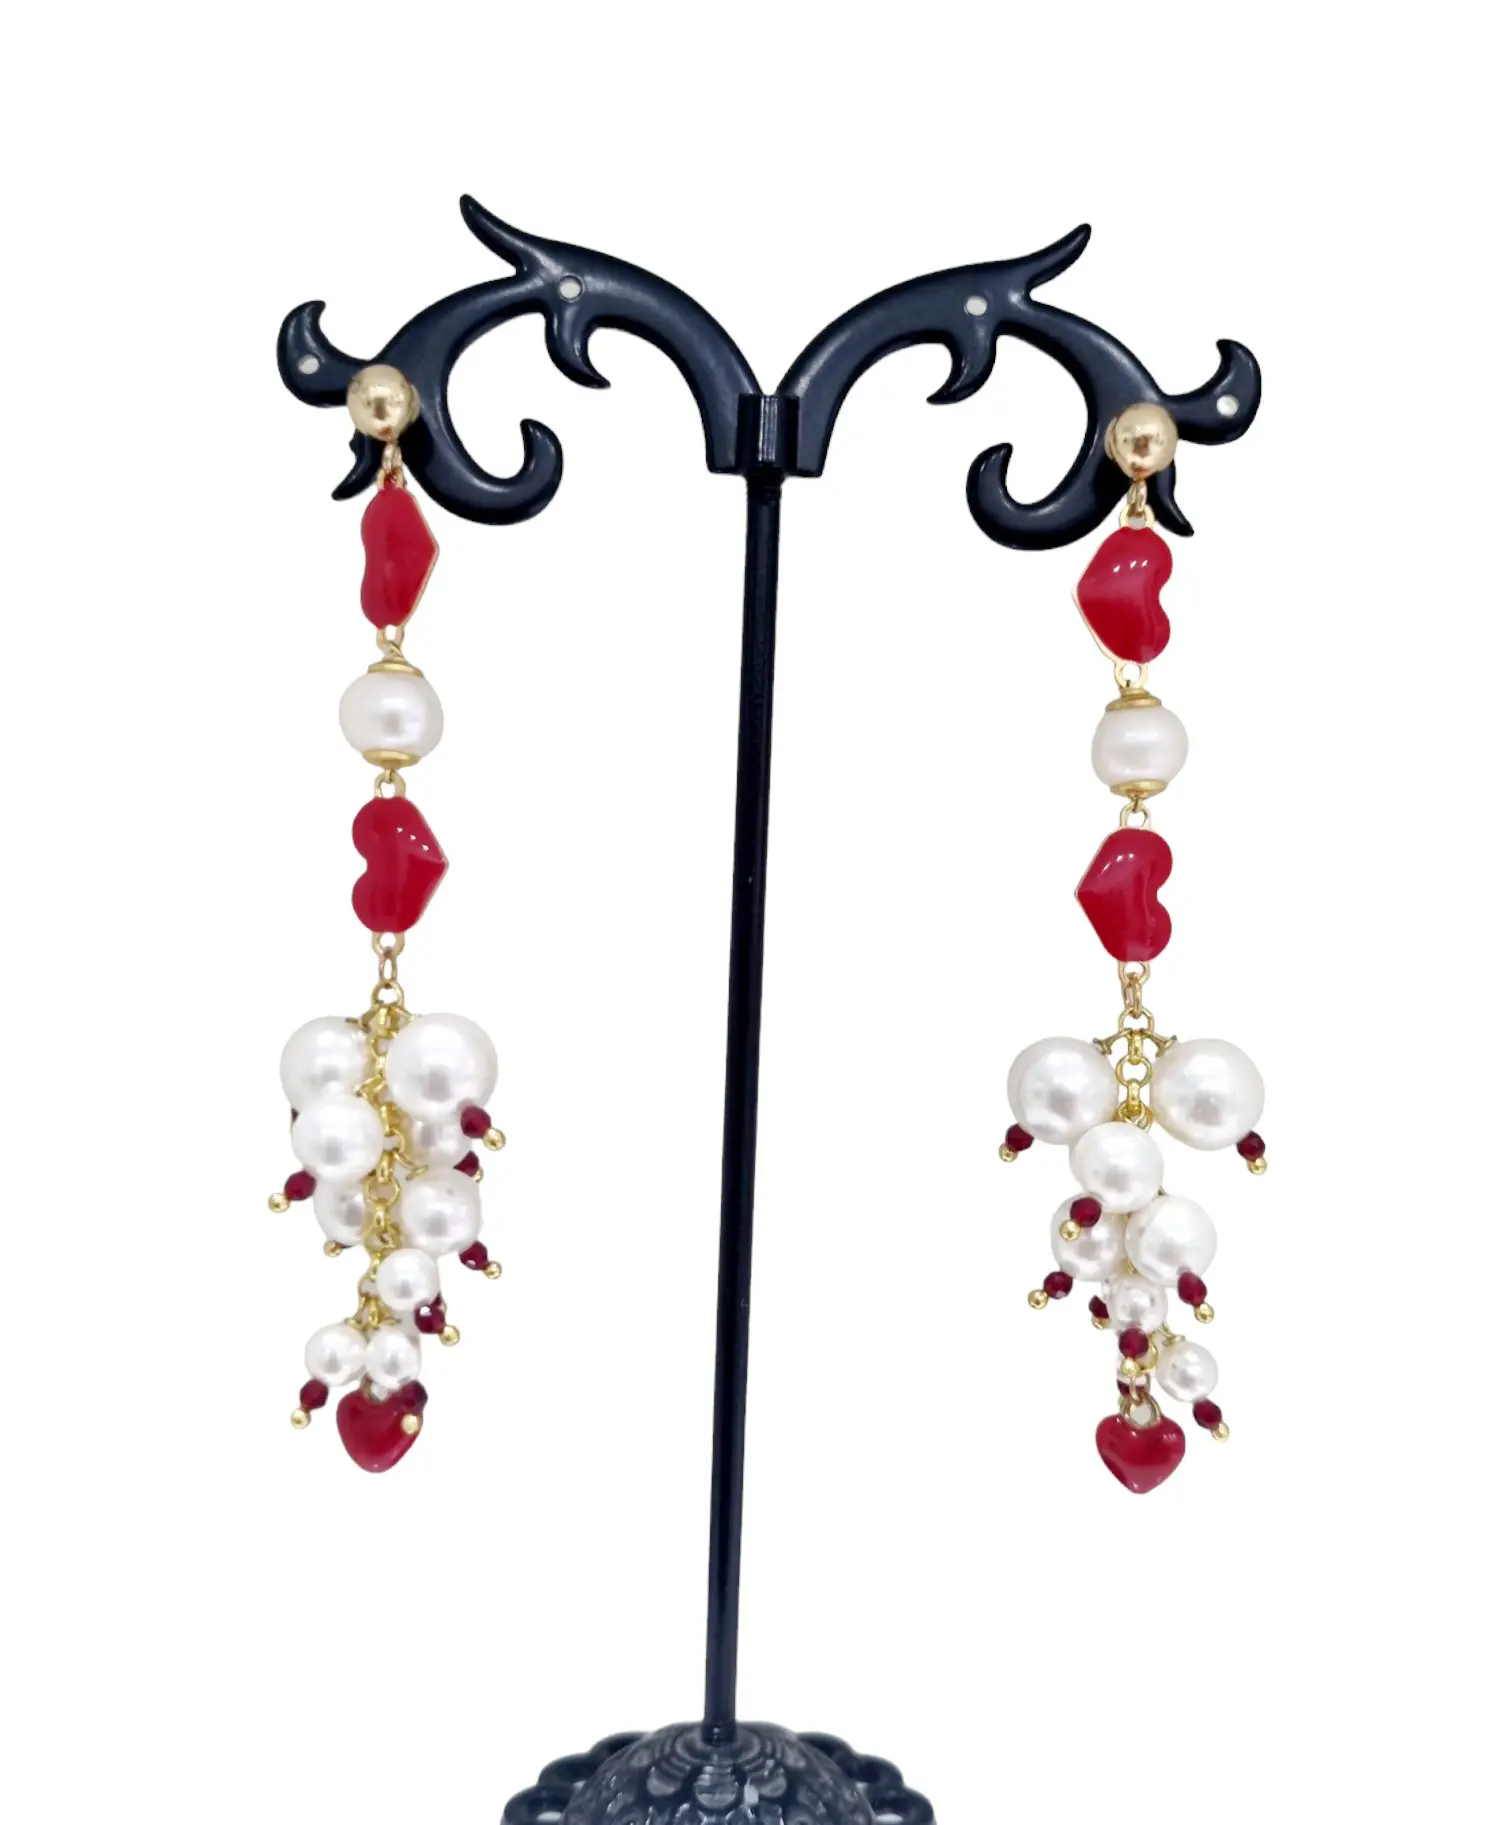 Love earrings made with a cascade of enamelled red hearts, crystals and Mallorcan pearls. Length 7.5cmWeight 6.4gr